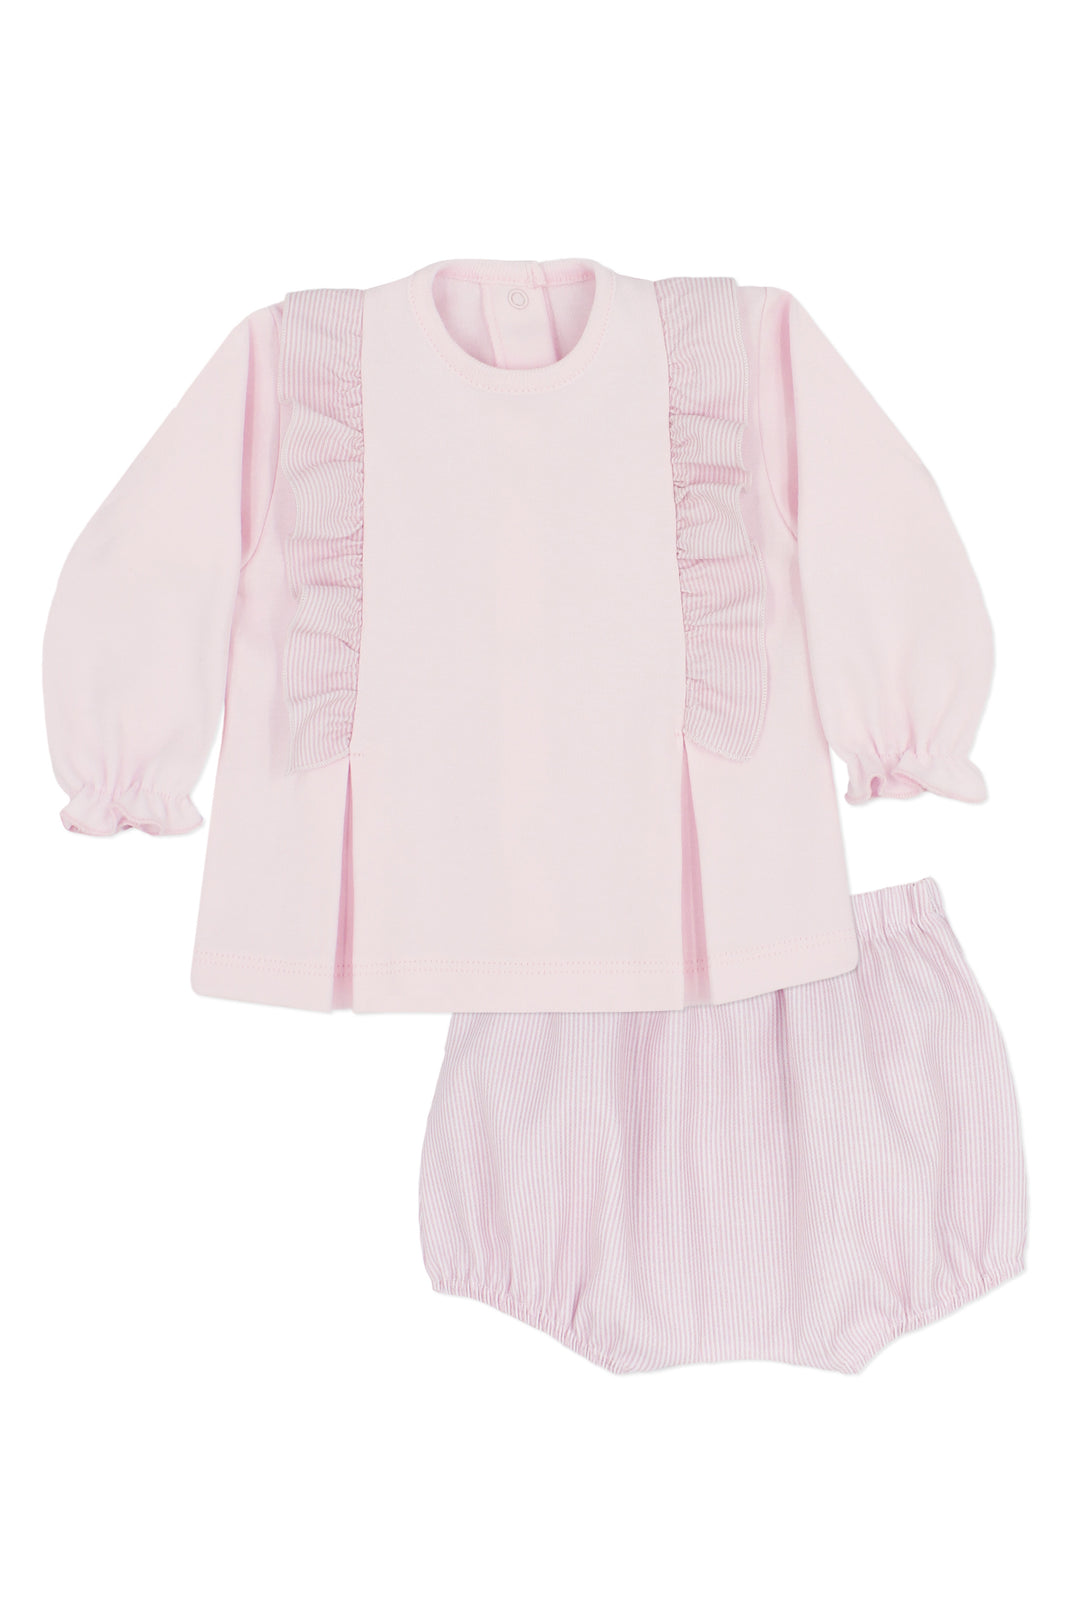 Rapife "Roisin" Pink Top & Striped Bloomers | Millie and John